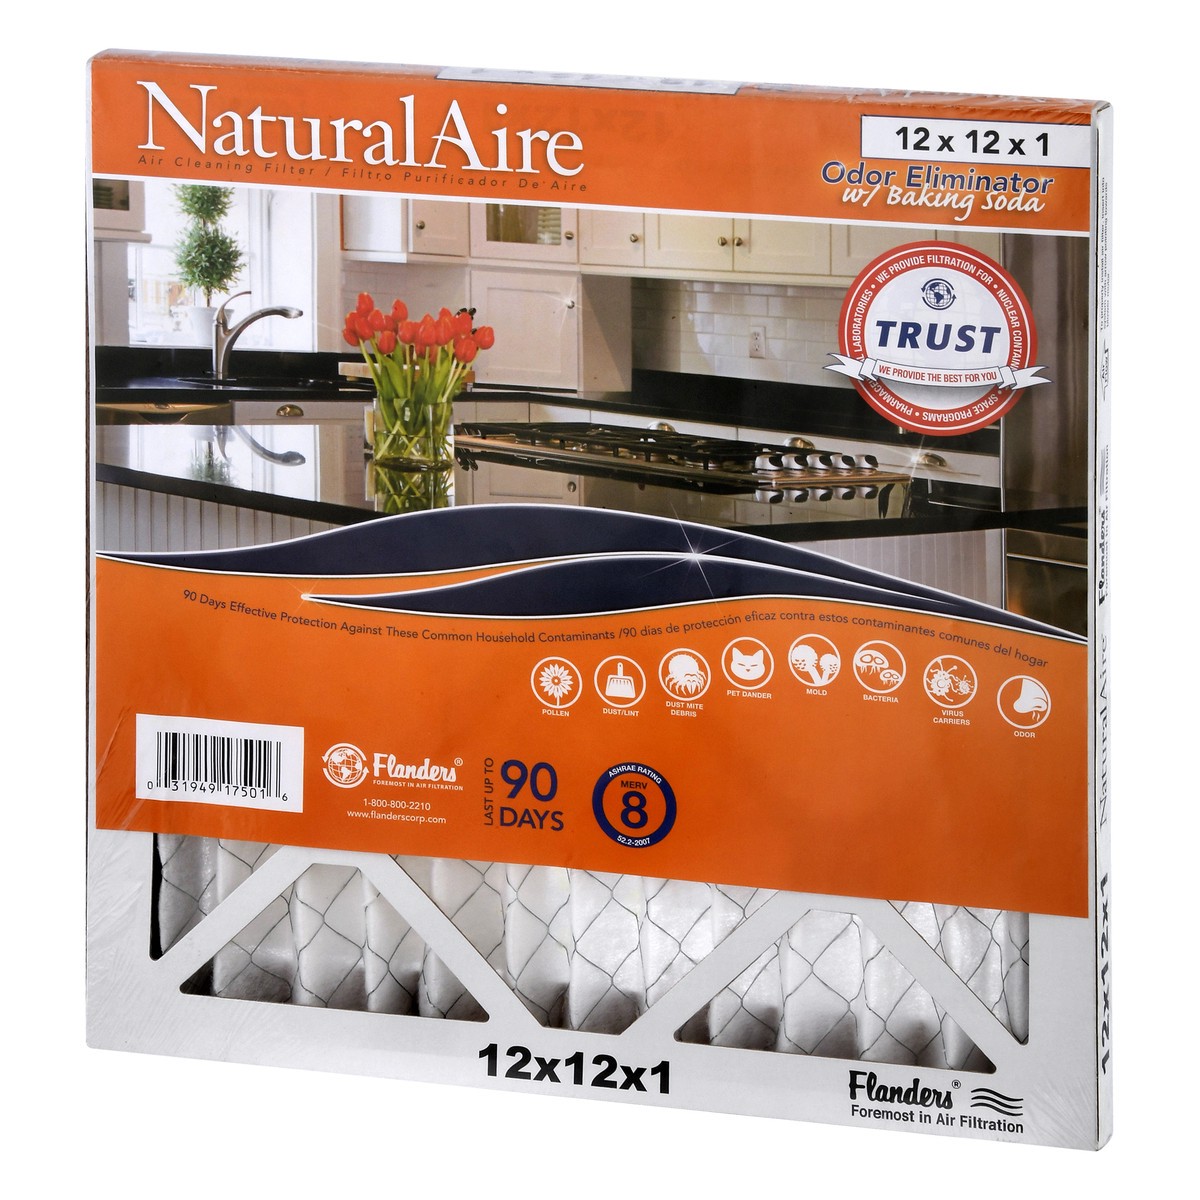 slide 7 of 11, NaturalAire 12" x 12" x 1" Air Cleaning Filter Odor Eliminator With Baking Soda, LG